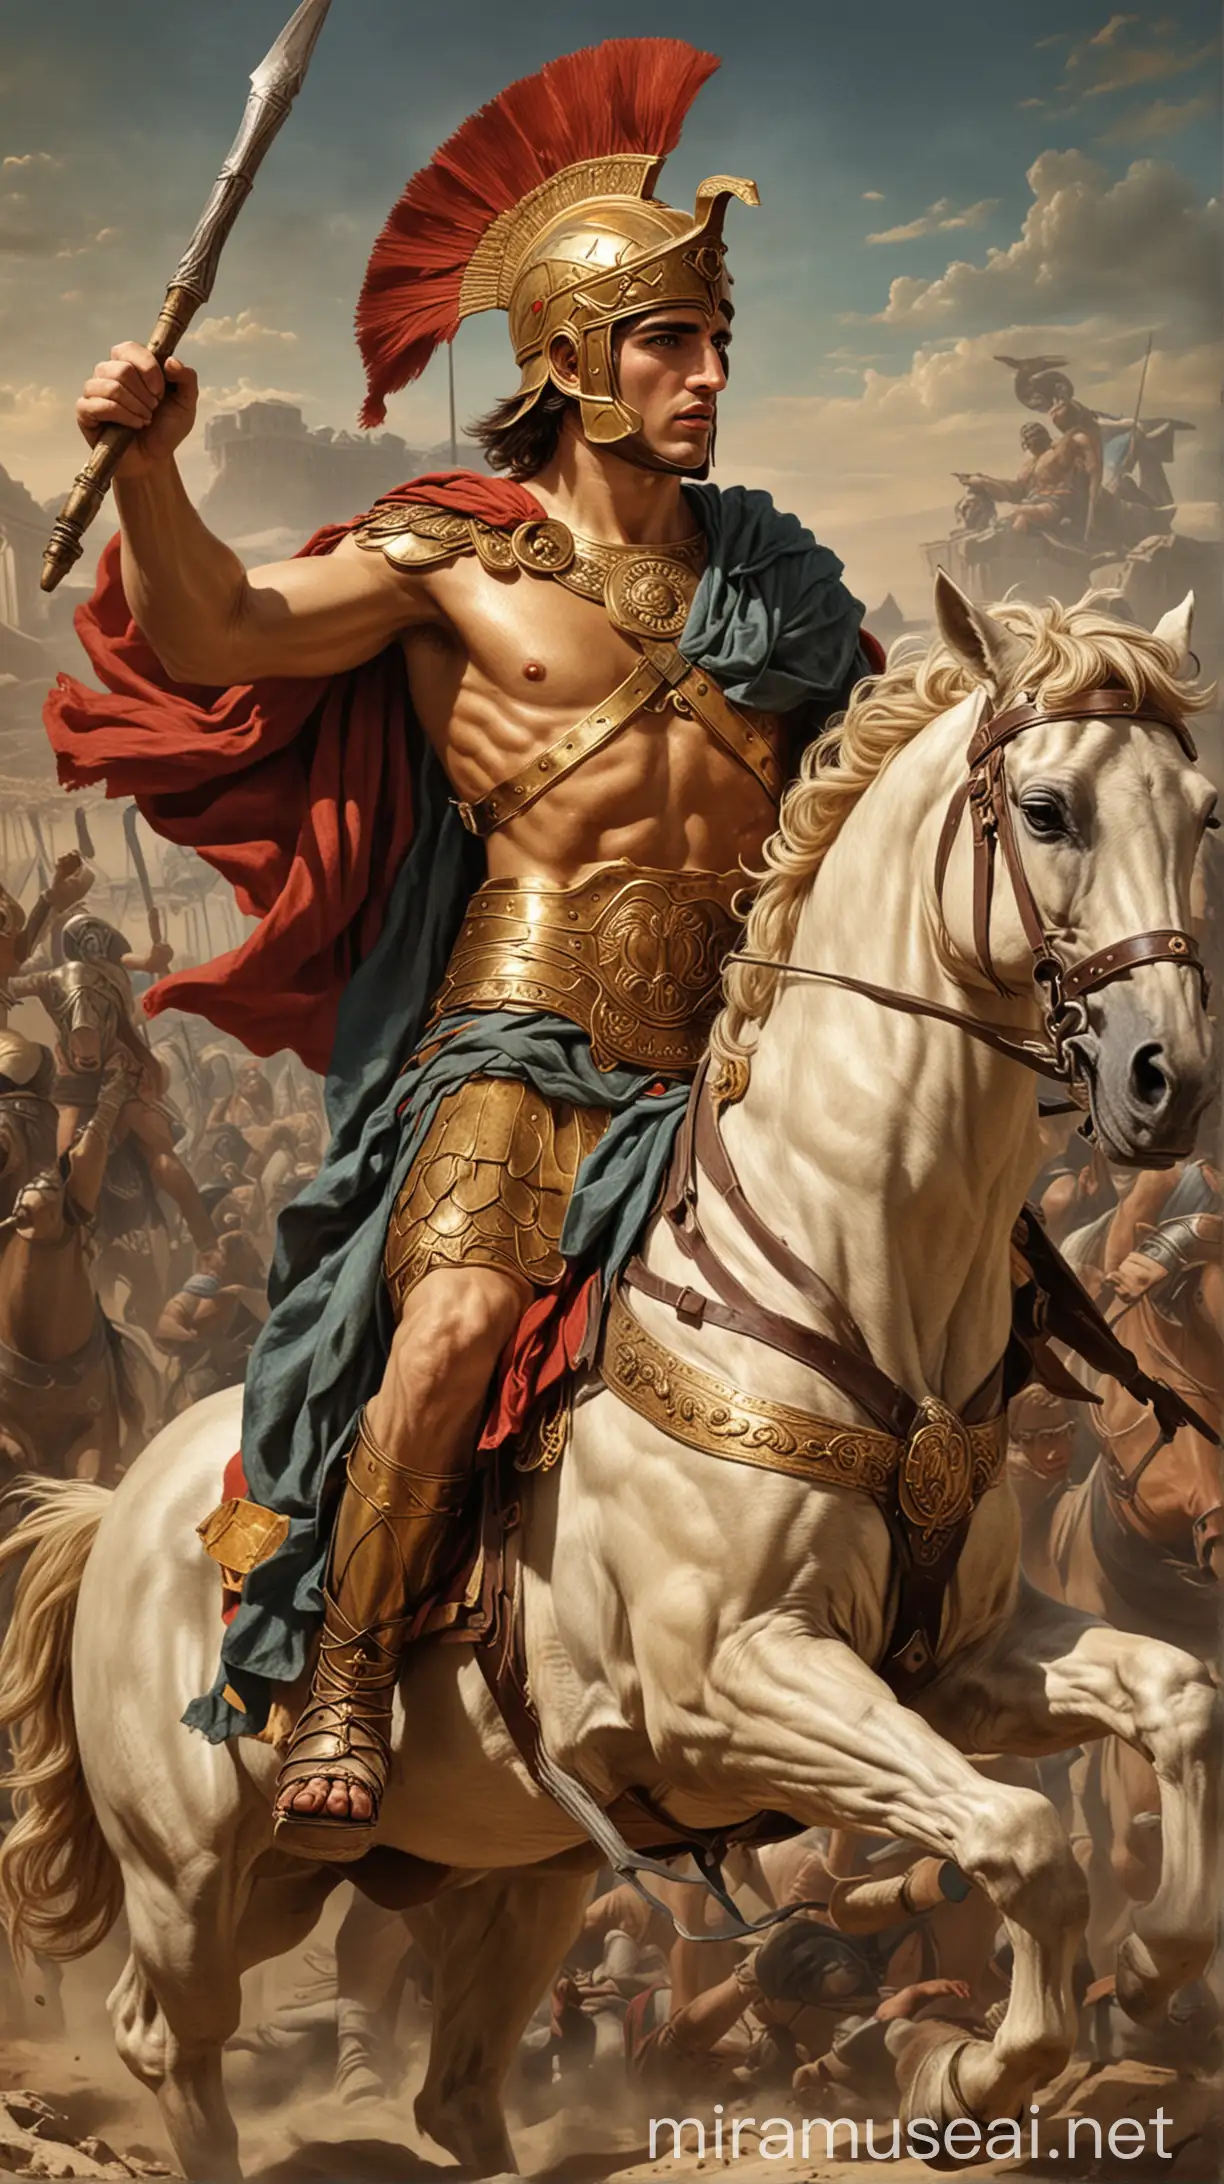 Alexander the Great Conquering the Ancient World